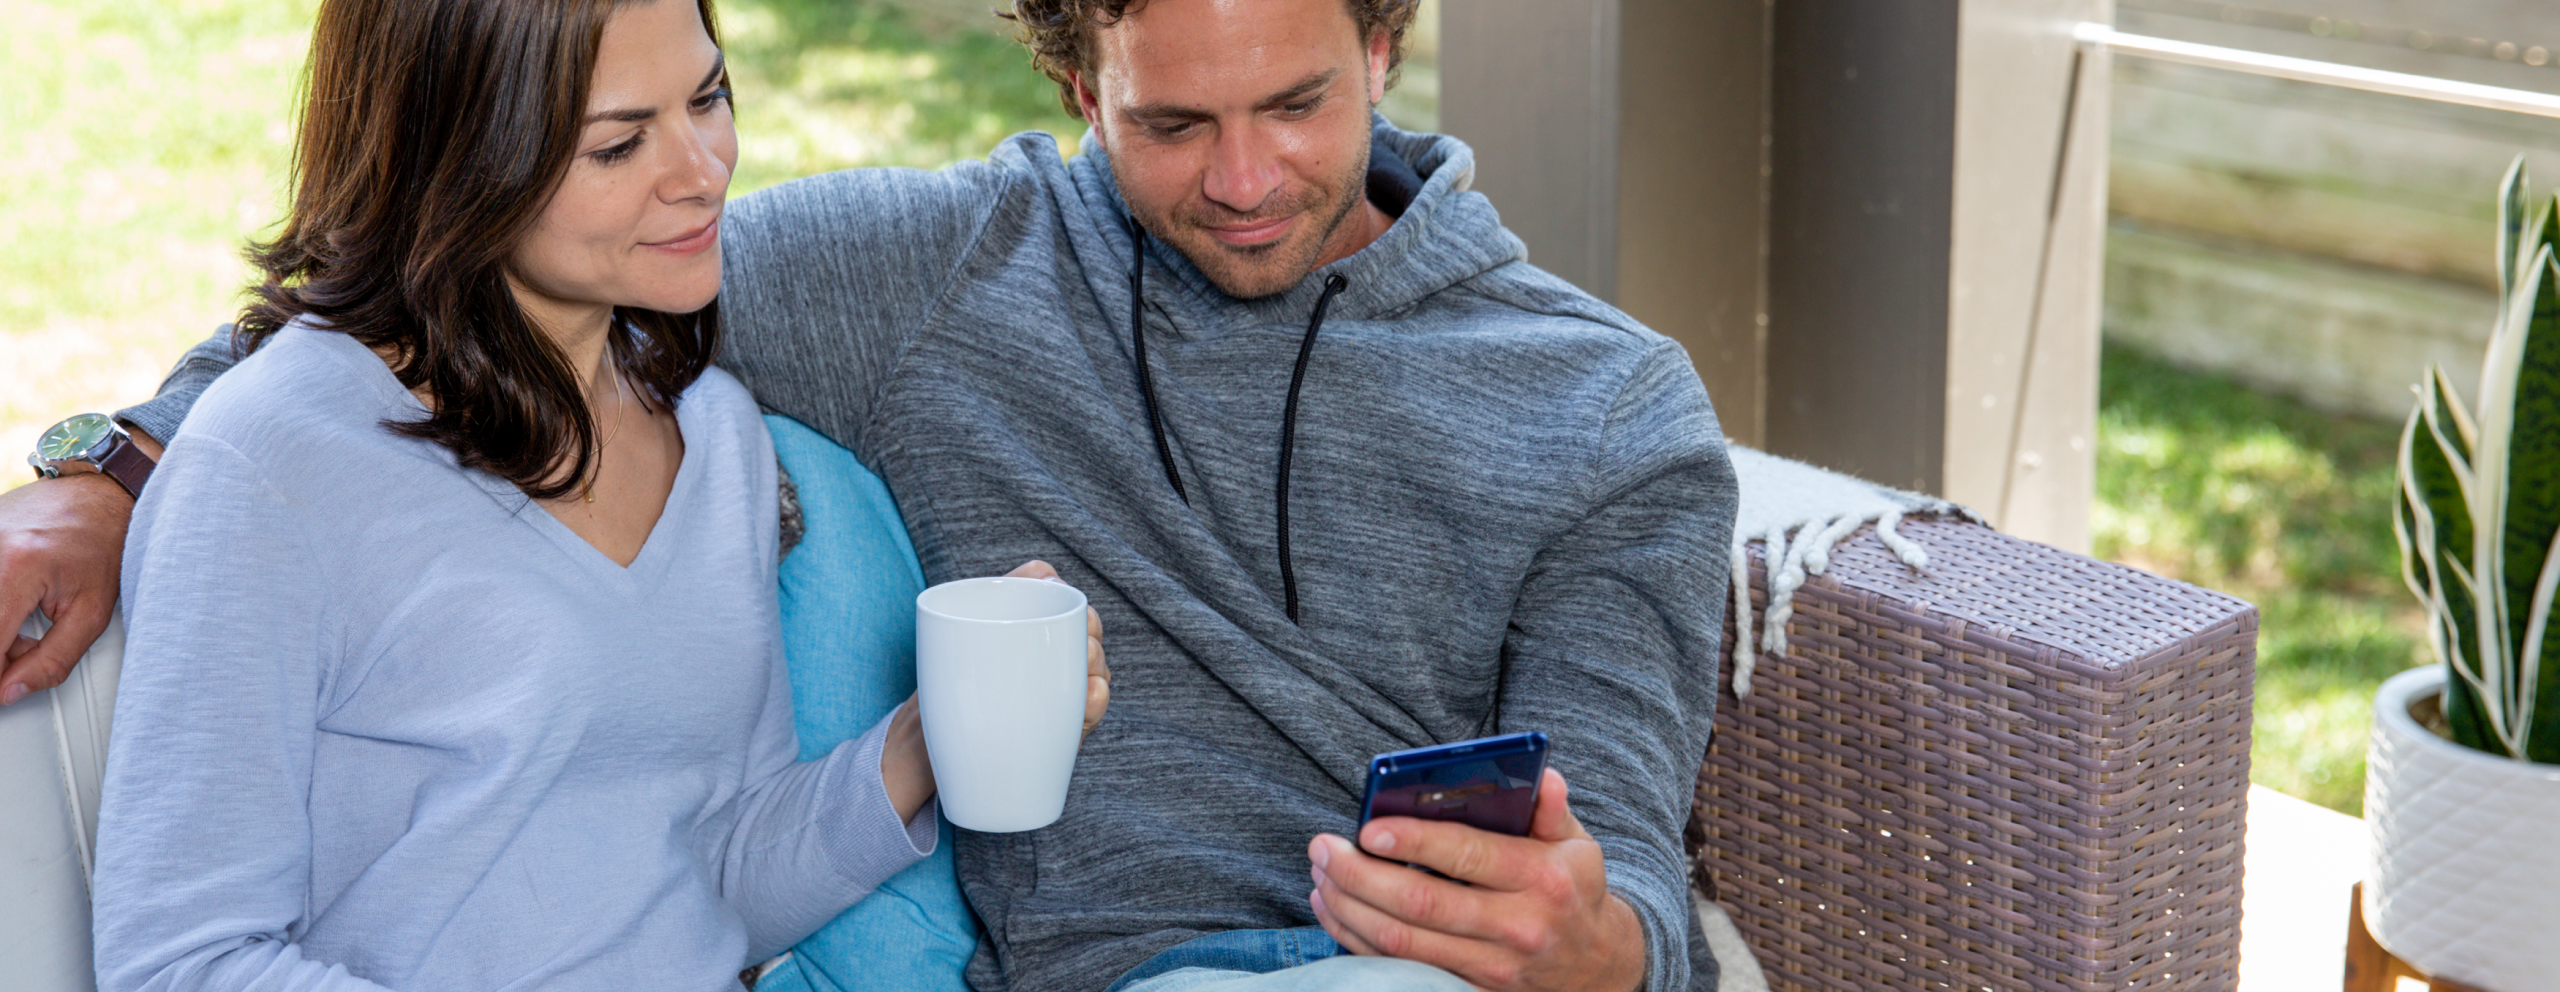 Man and woman looking at phone on porch